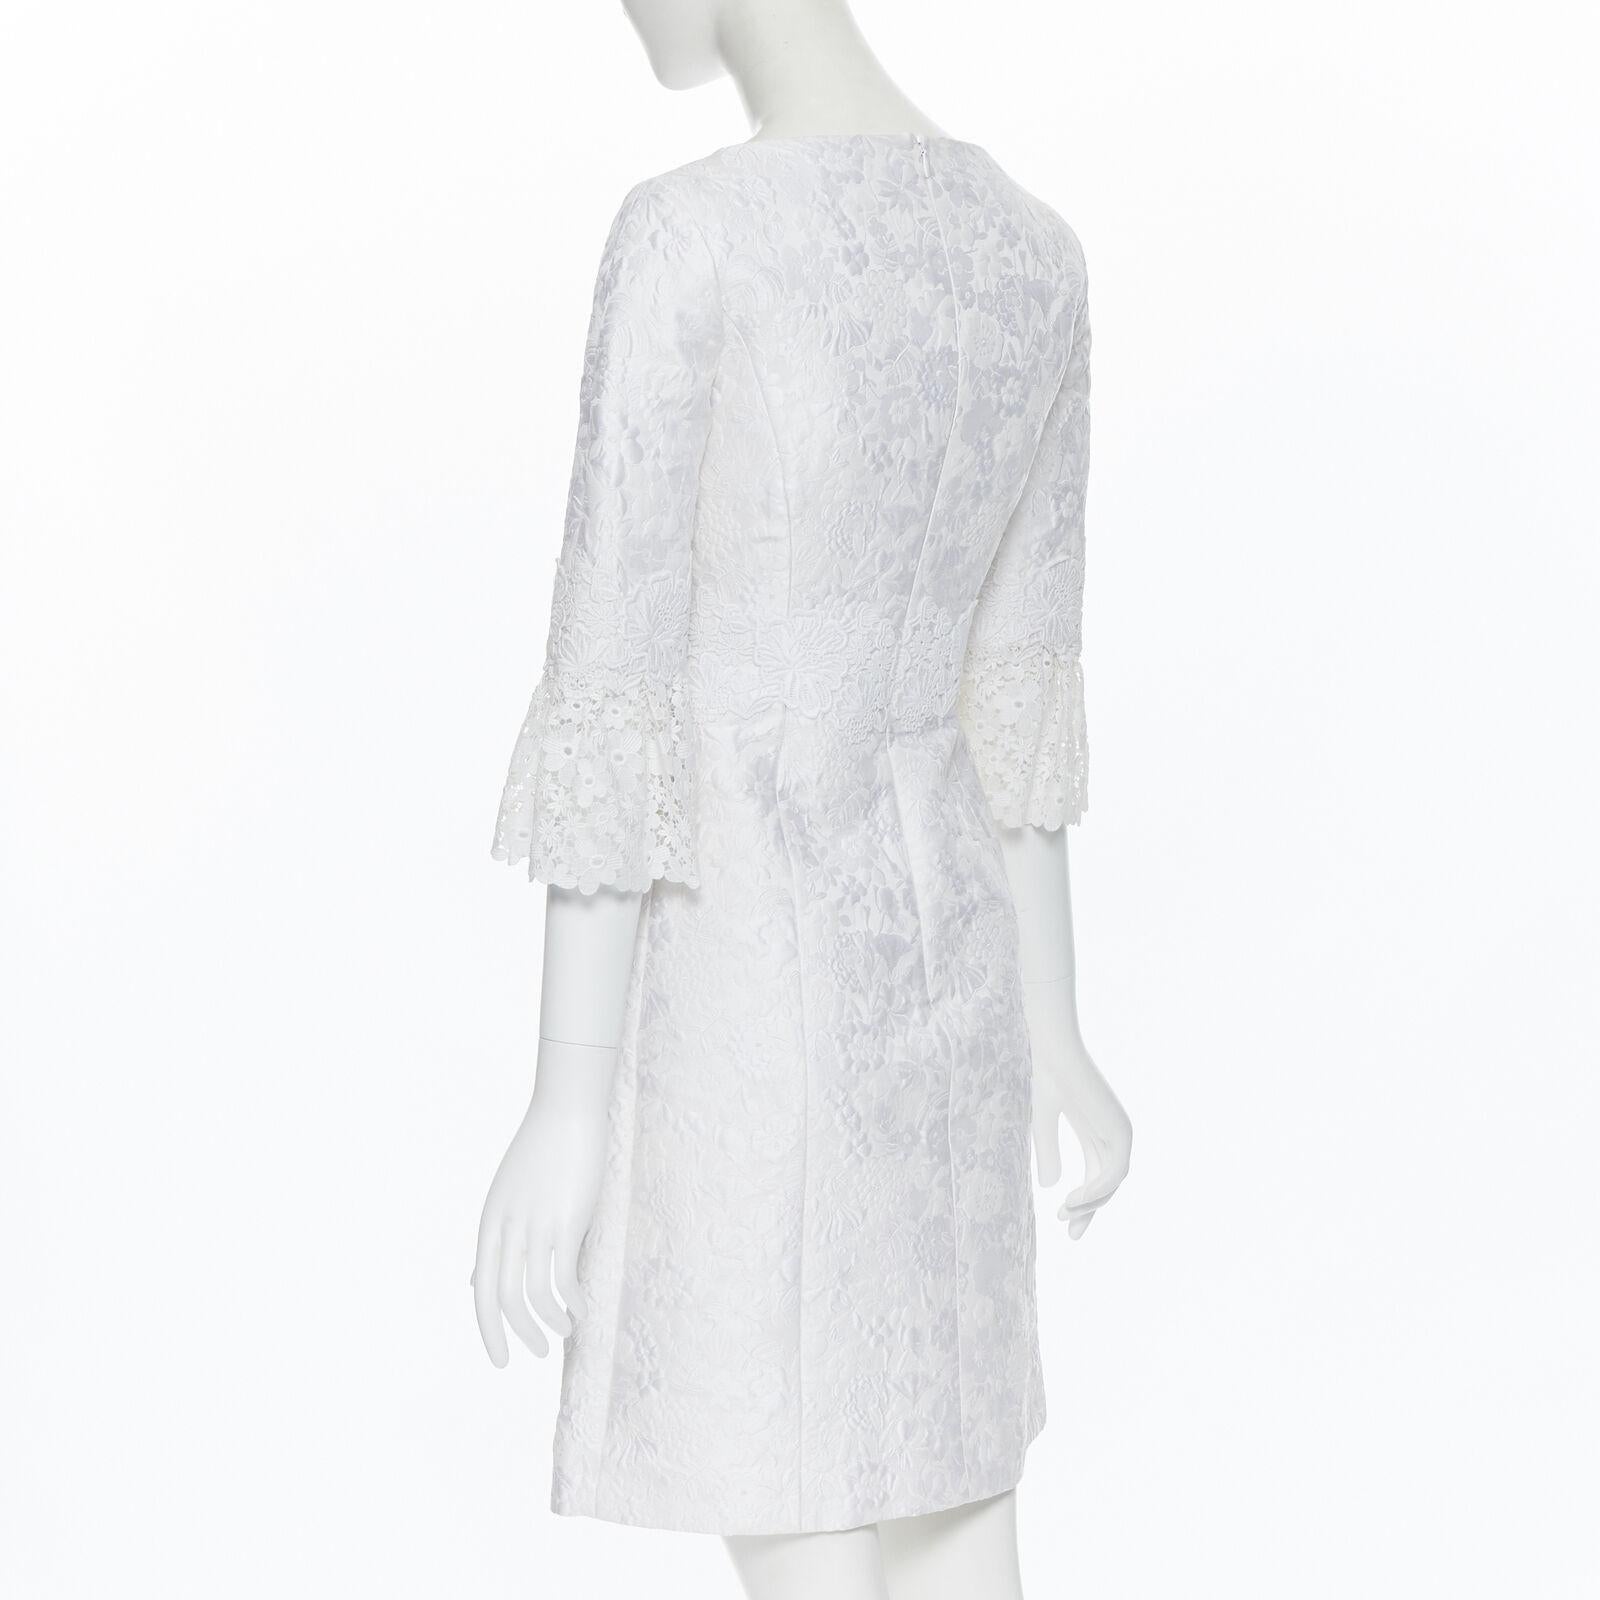 MICHAEL KORS COLLECTION white floral cloque lace trimmed 3/4 sleeve dress US0 For Sale 2